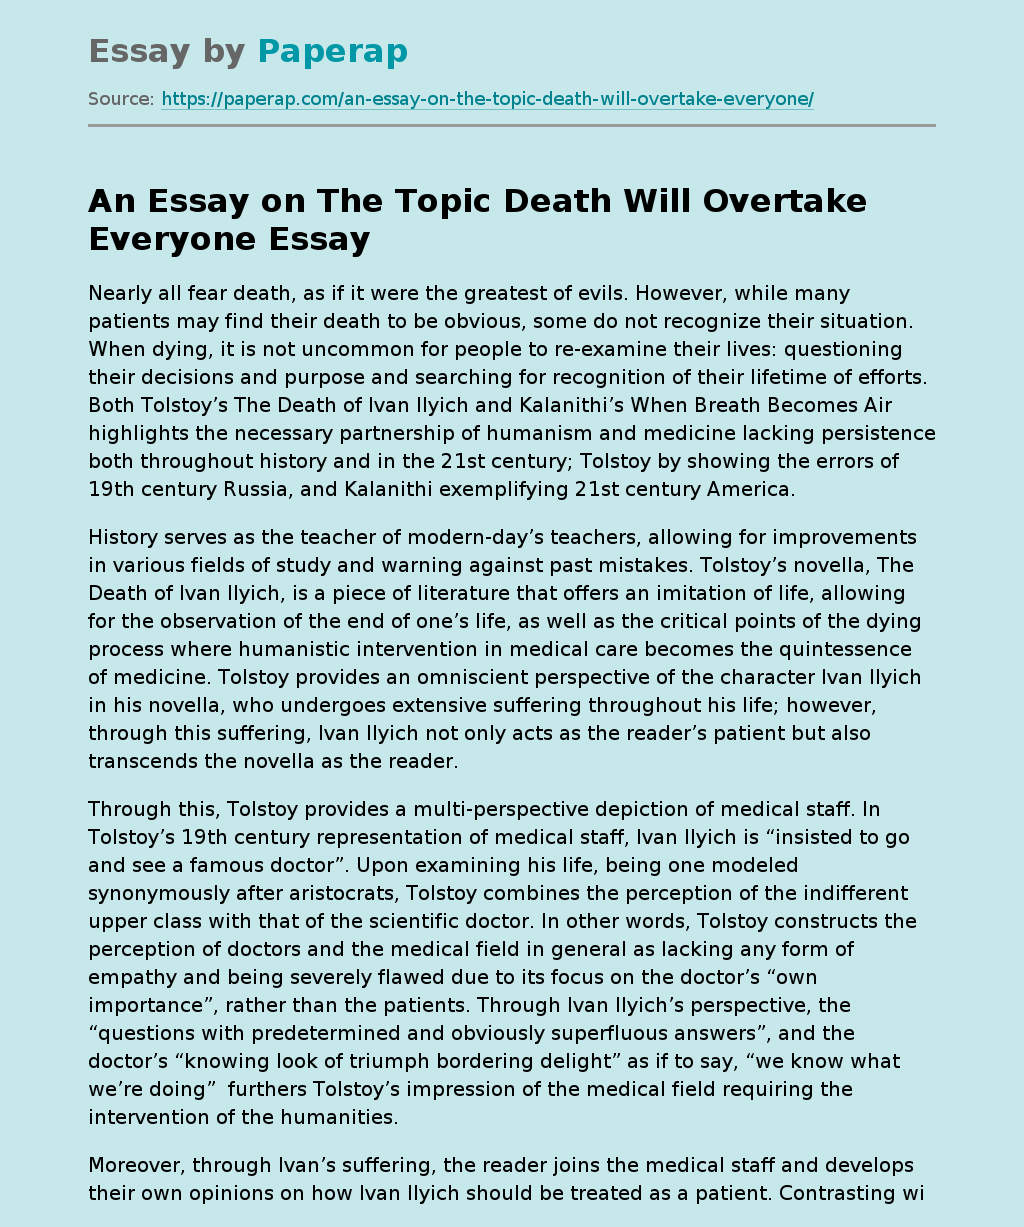 An Essay on The Topic Death Will Overtake Everyone